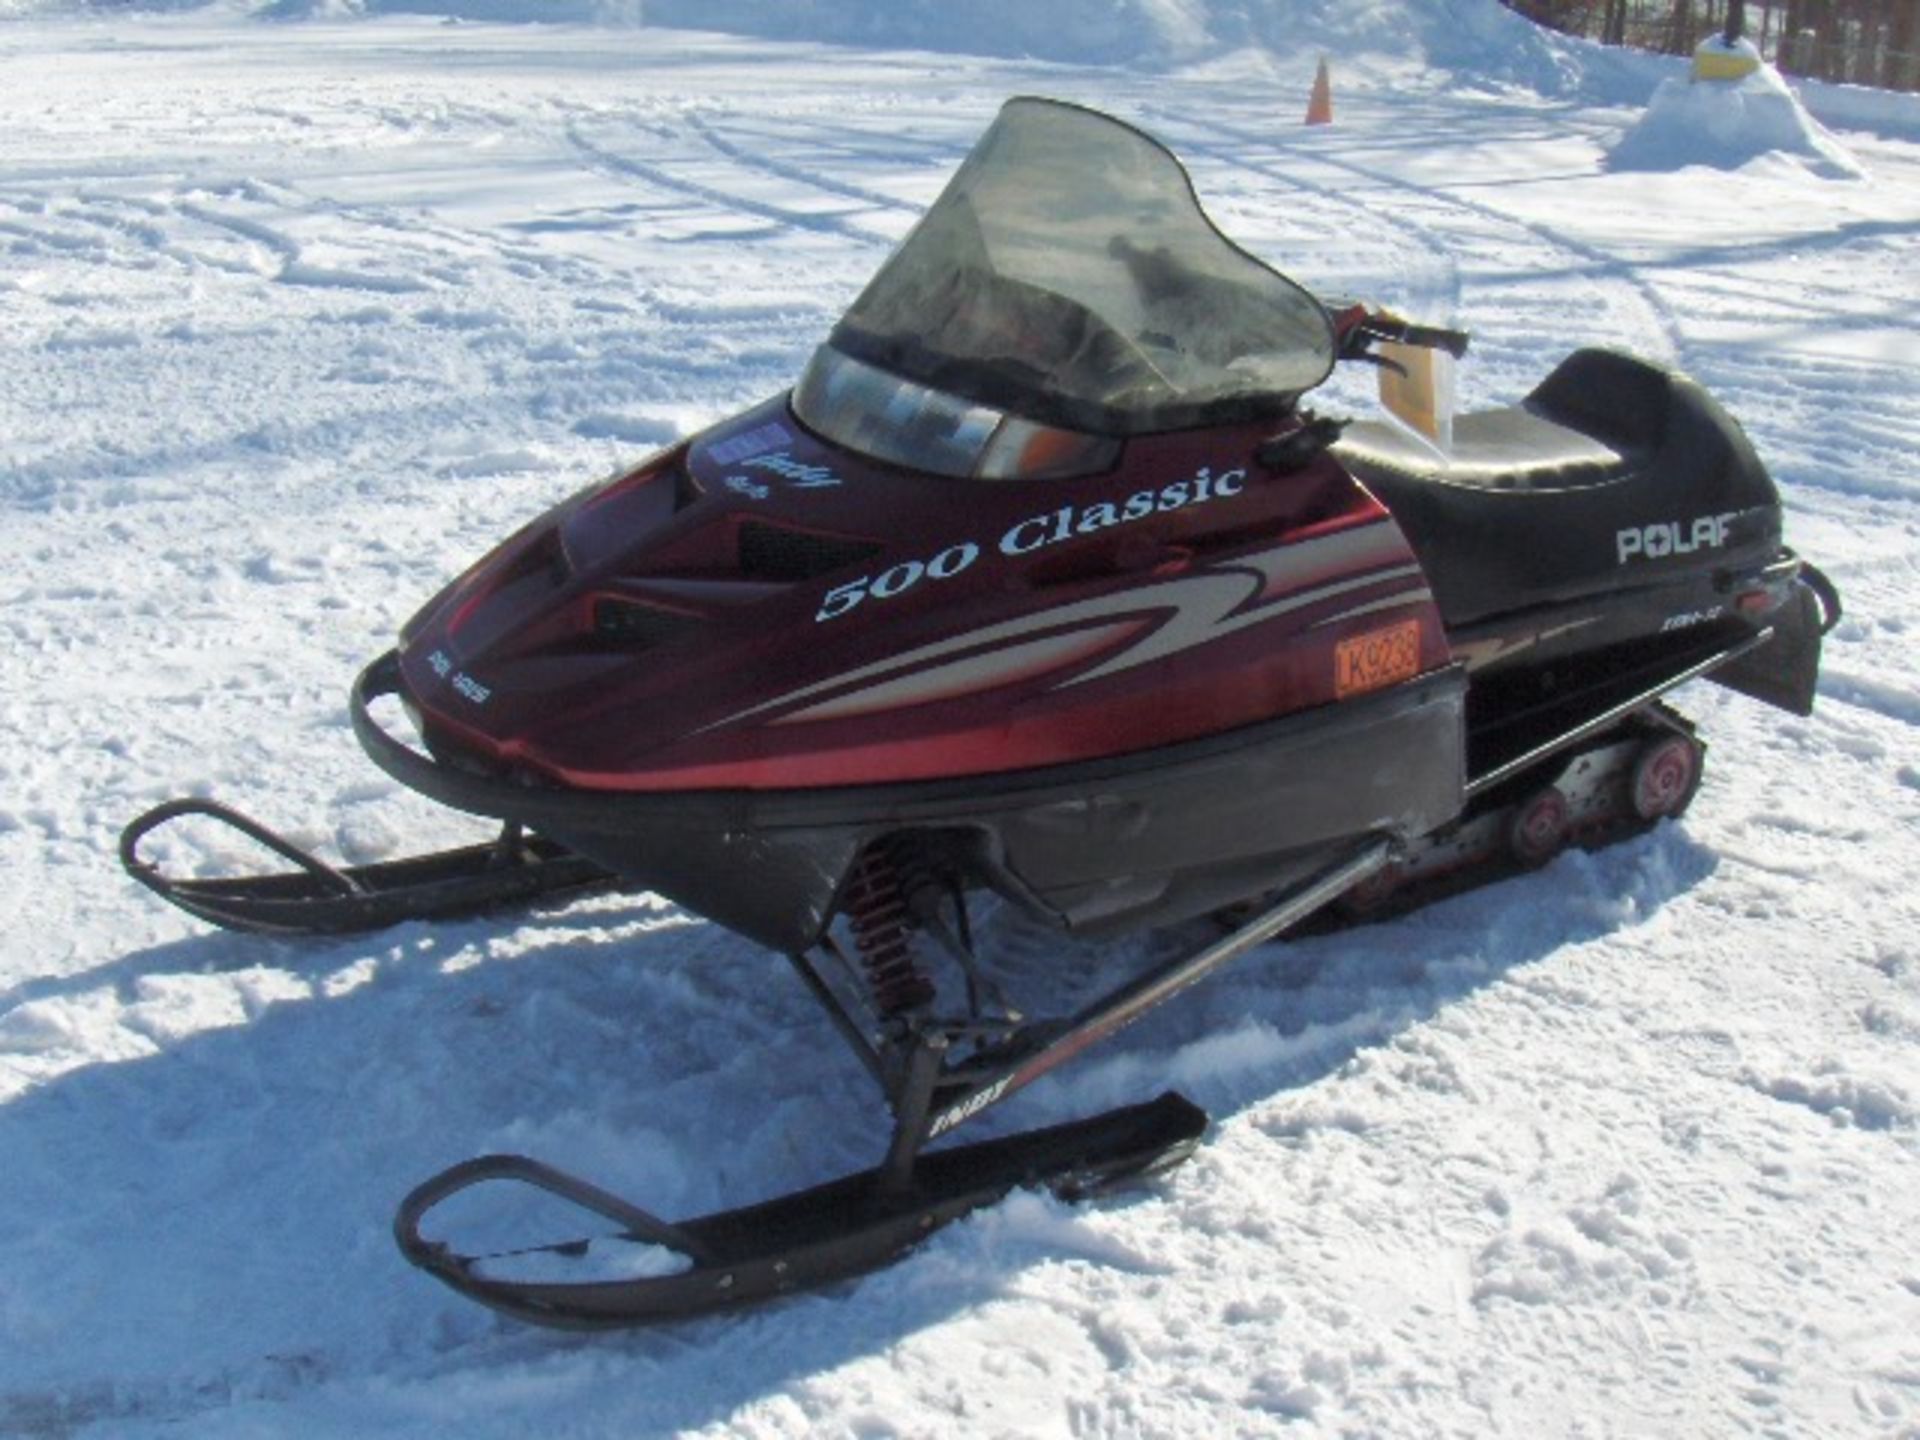 2000 POLARIS 500 CLASSIC  4XASD4B59YC006125 snowmobile, owner started at time of auction check in,